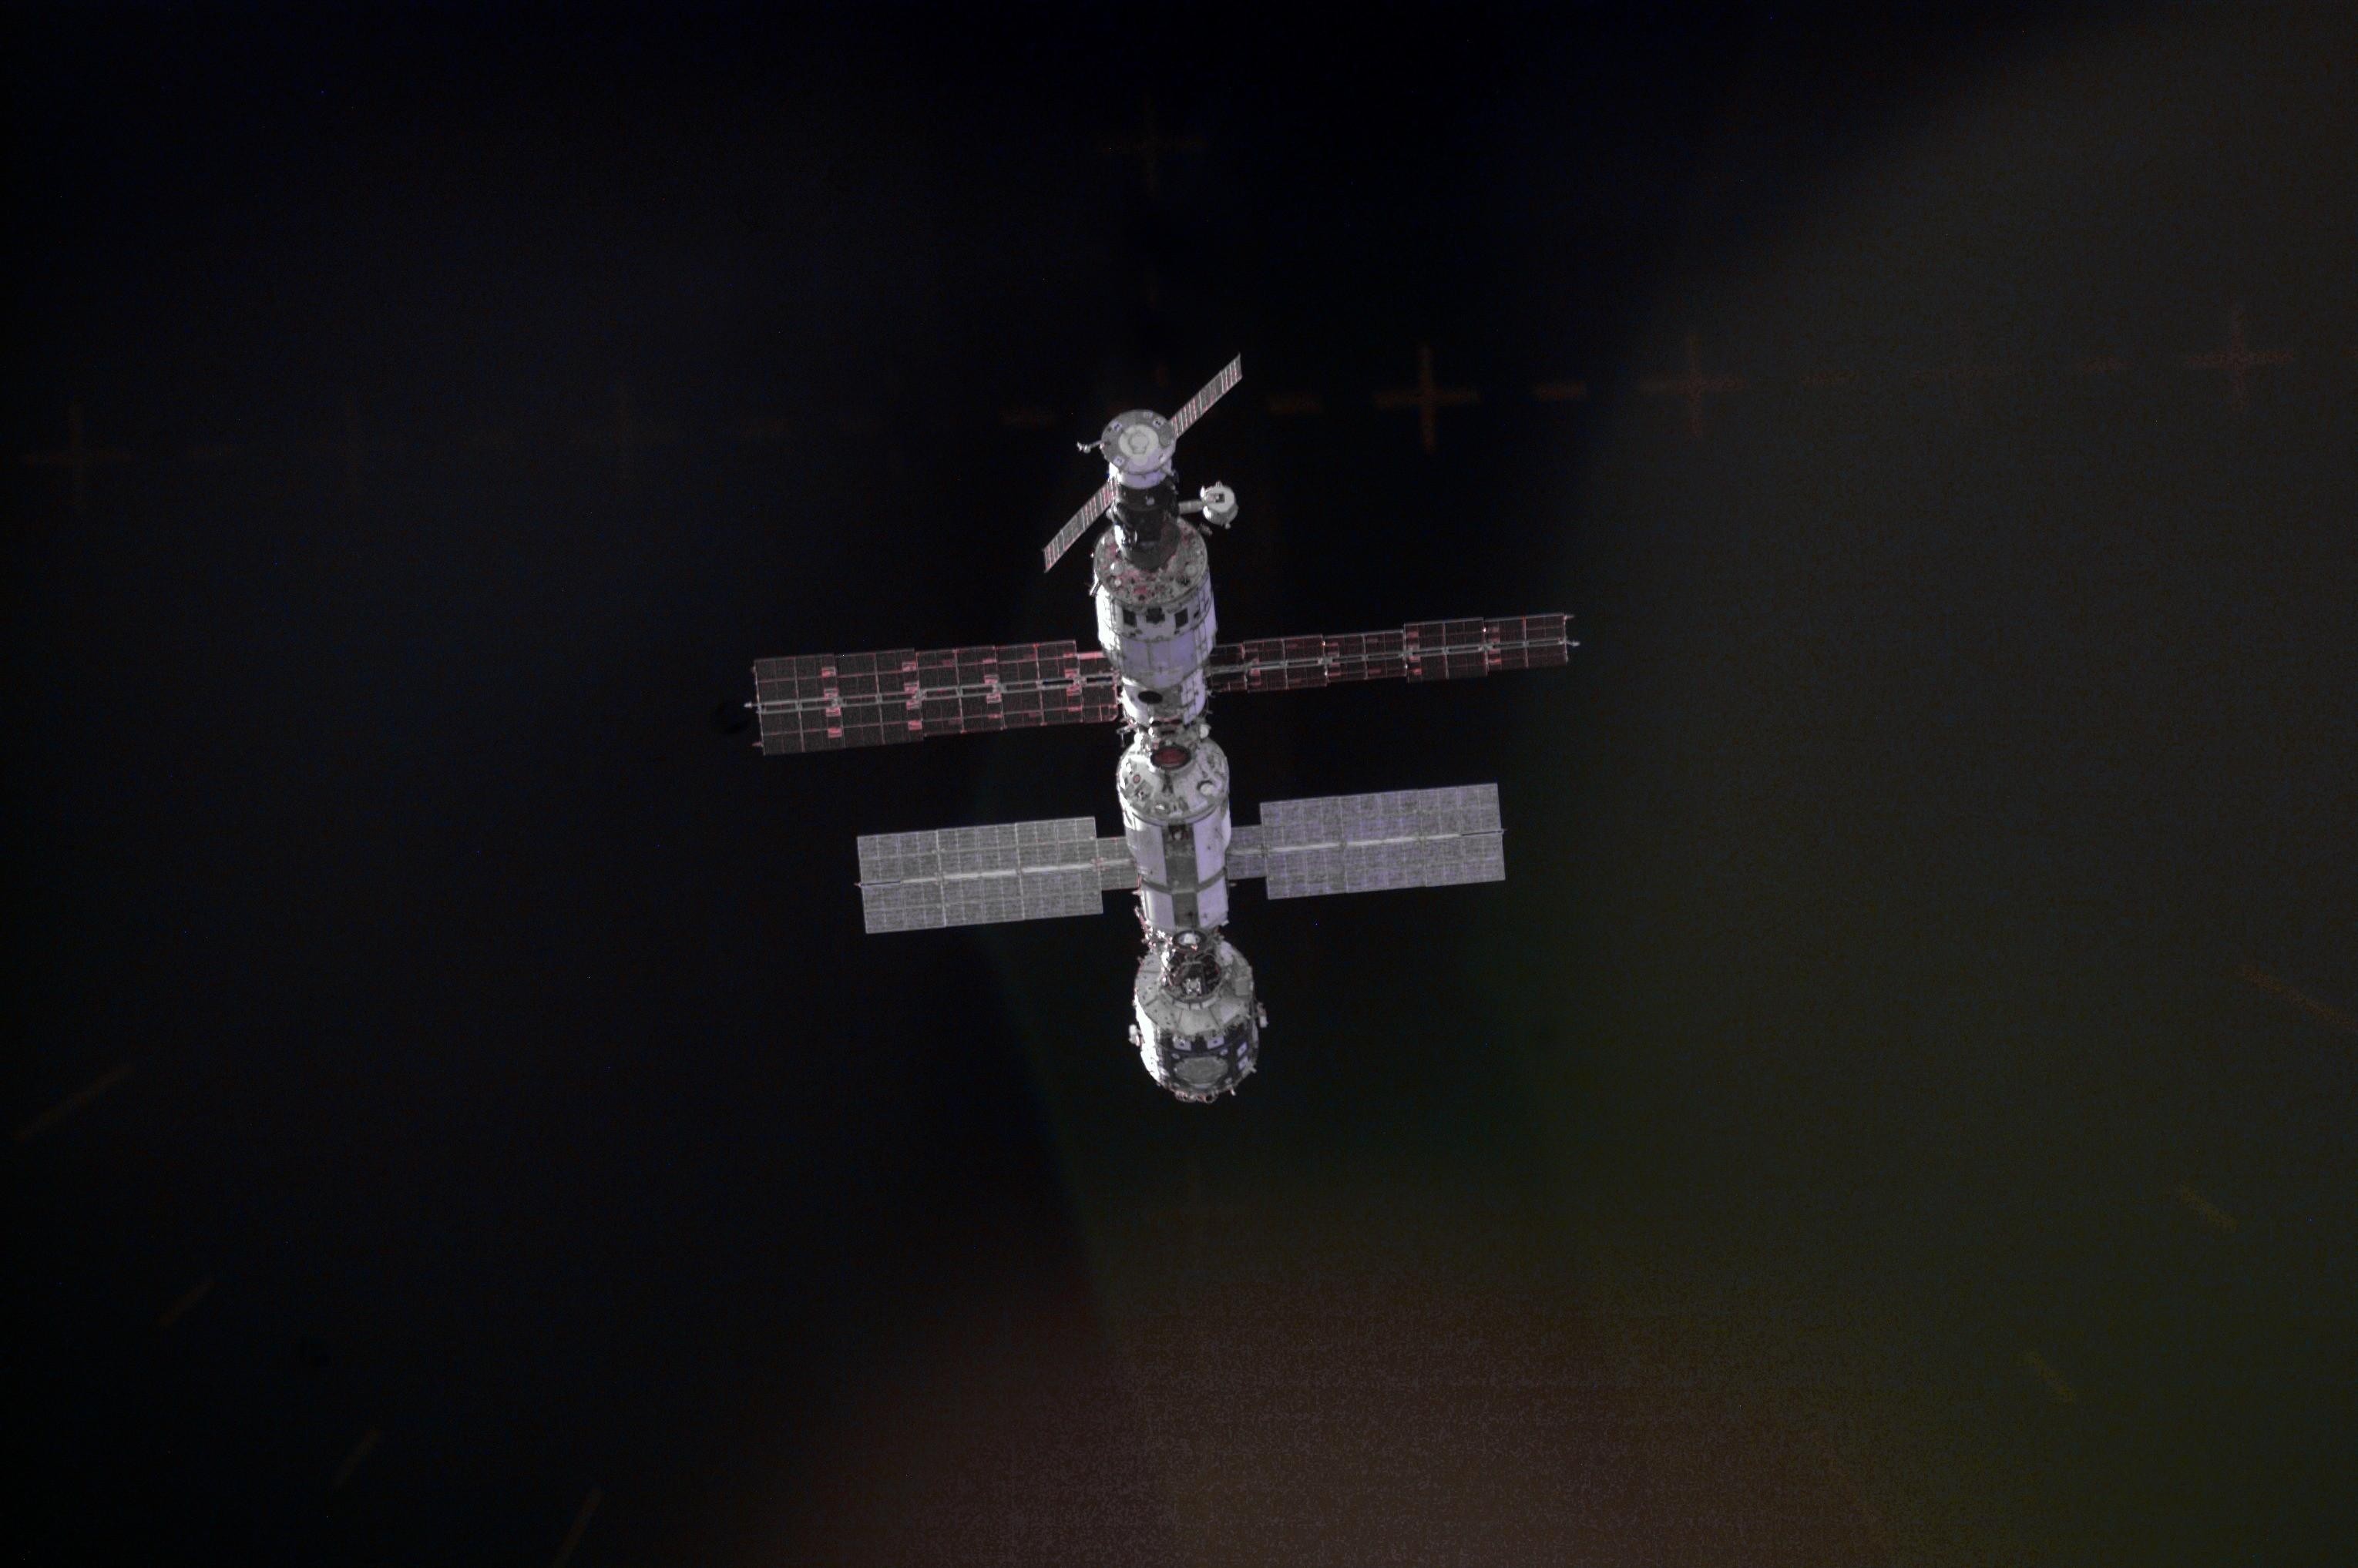 3060x2035 wallpaper The international space station in dark space.